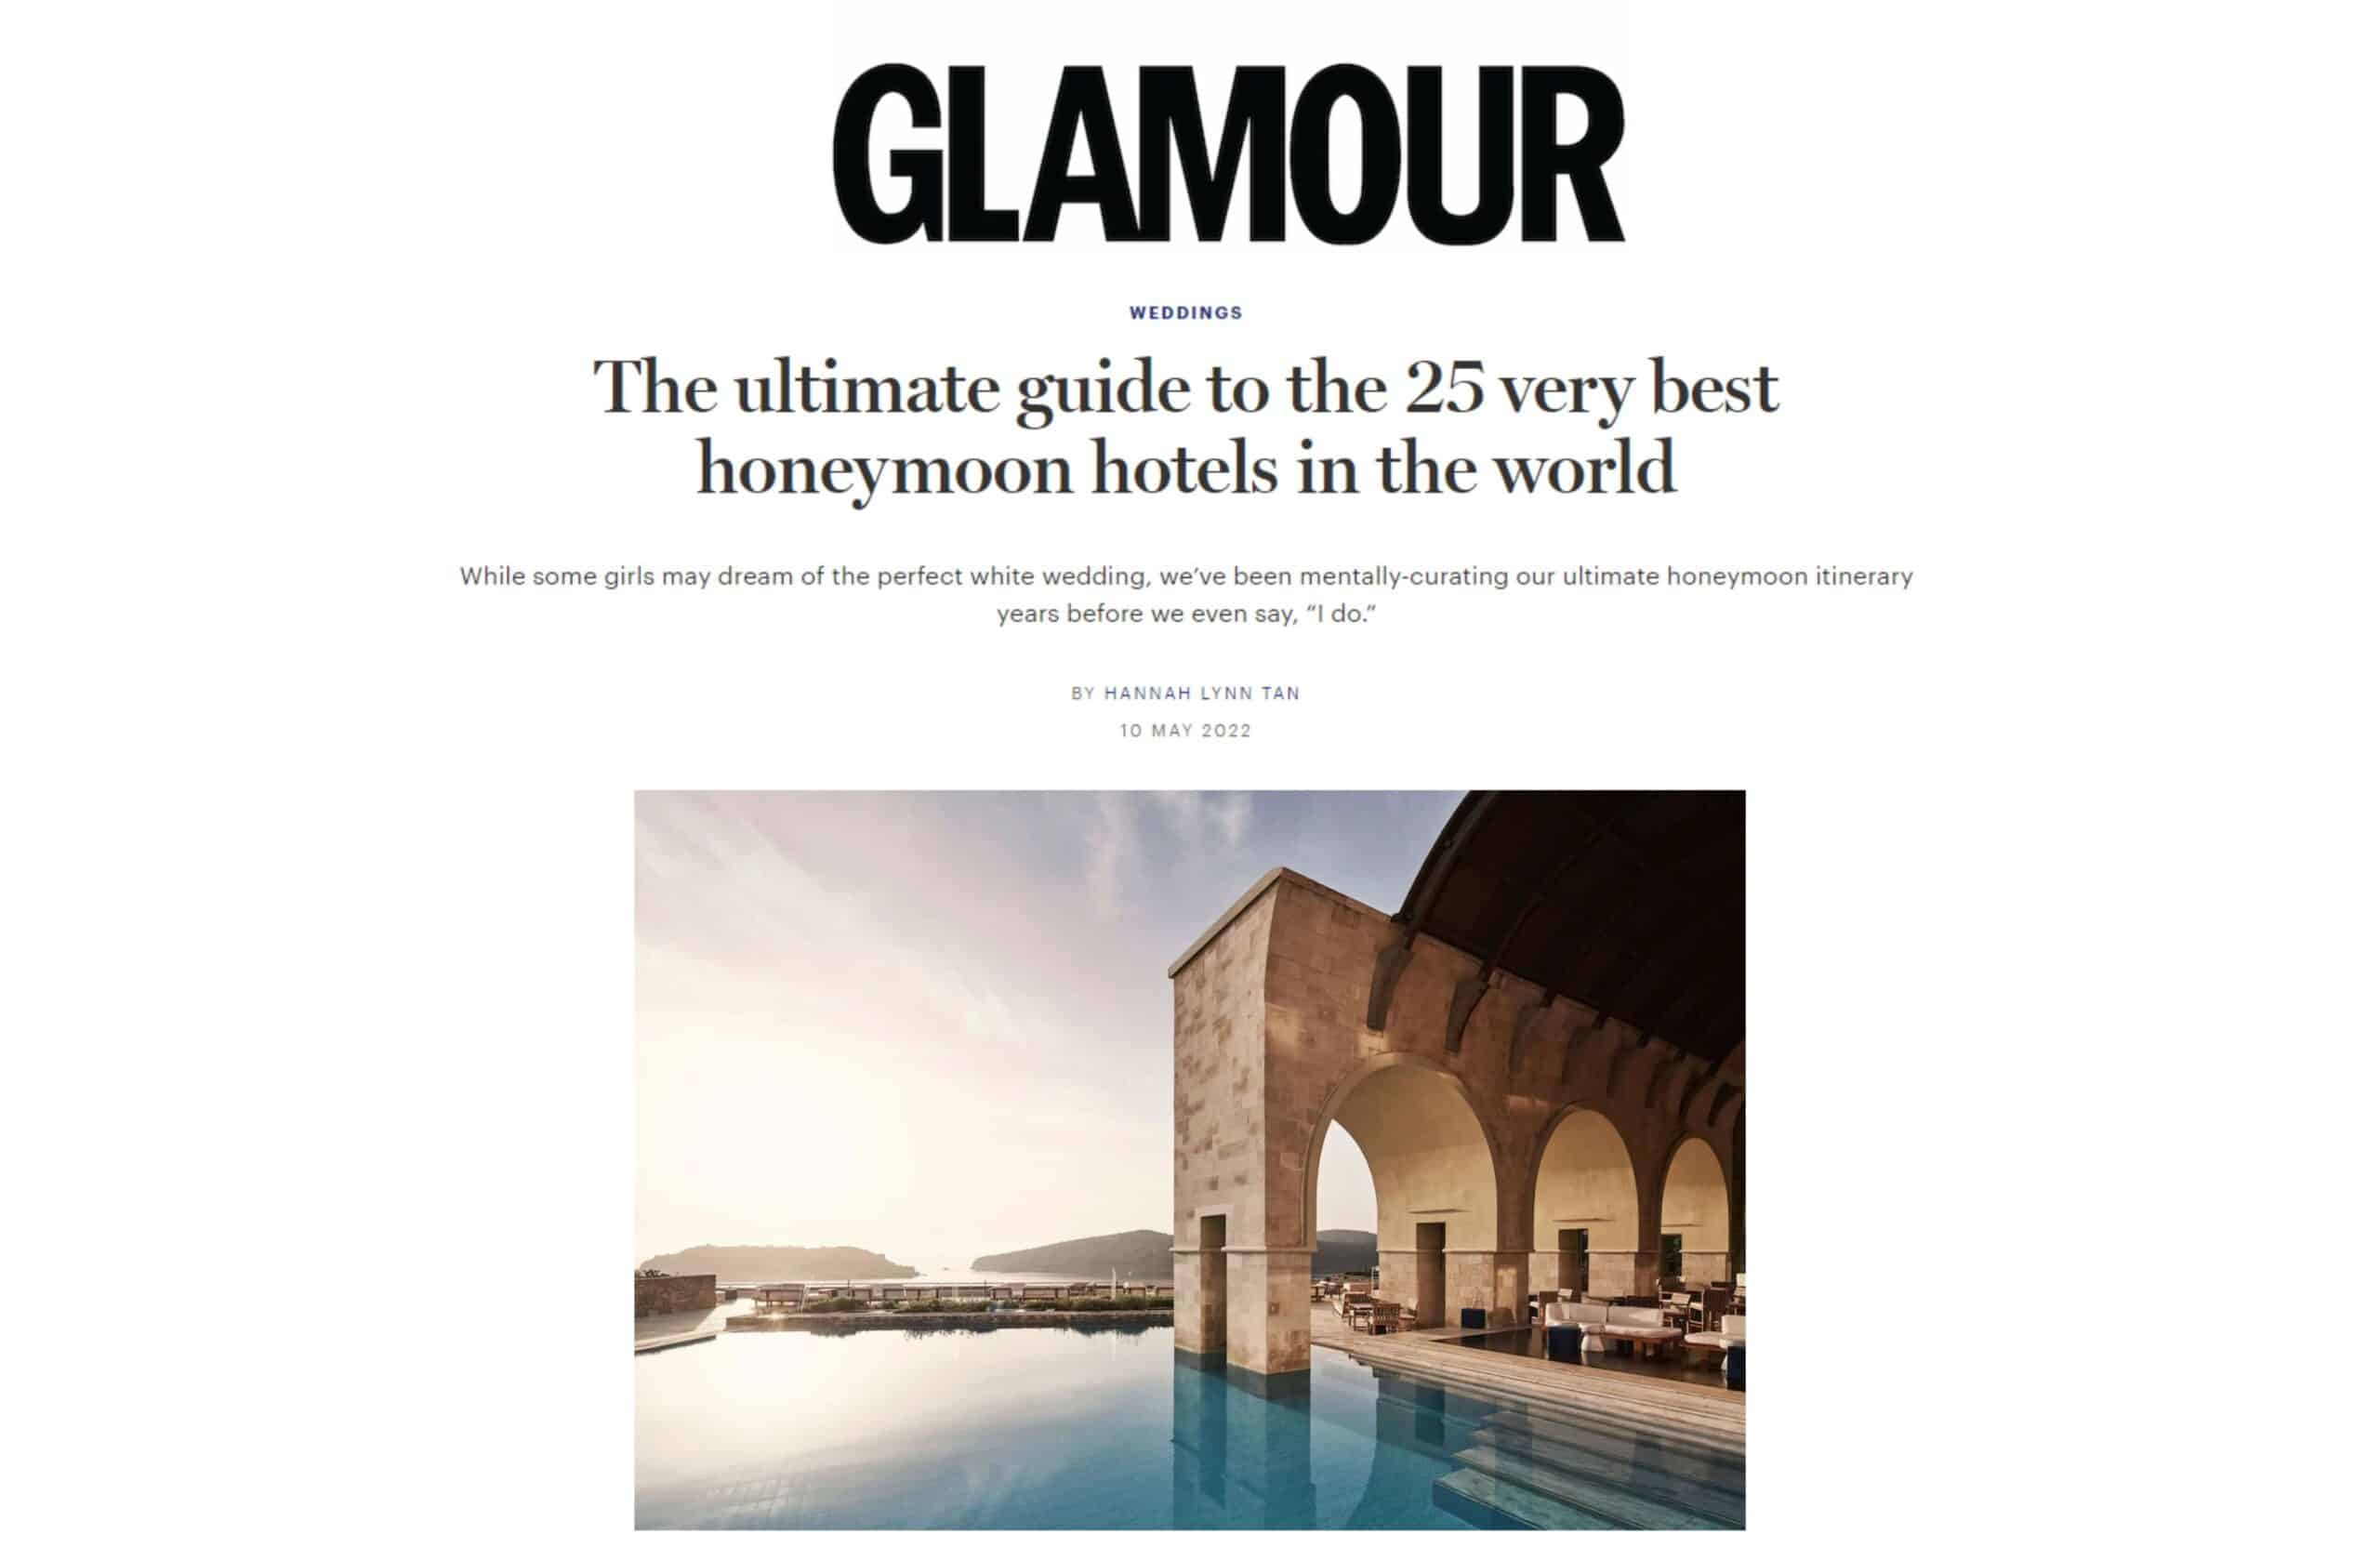 The Ultimate Guide To The 25 Very Best Honeymoon Hotels In The World, By Hannah Lynn Tan In Glamour Magazine